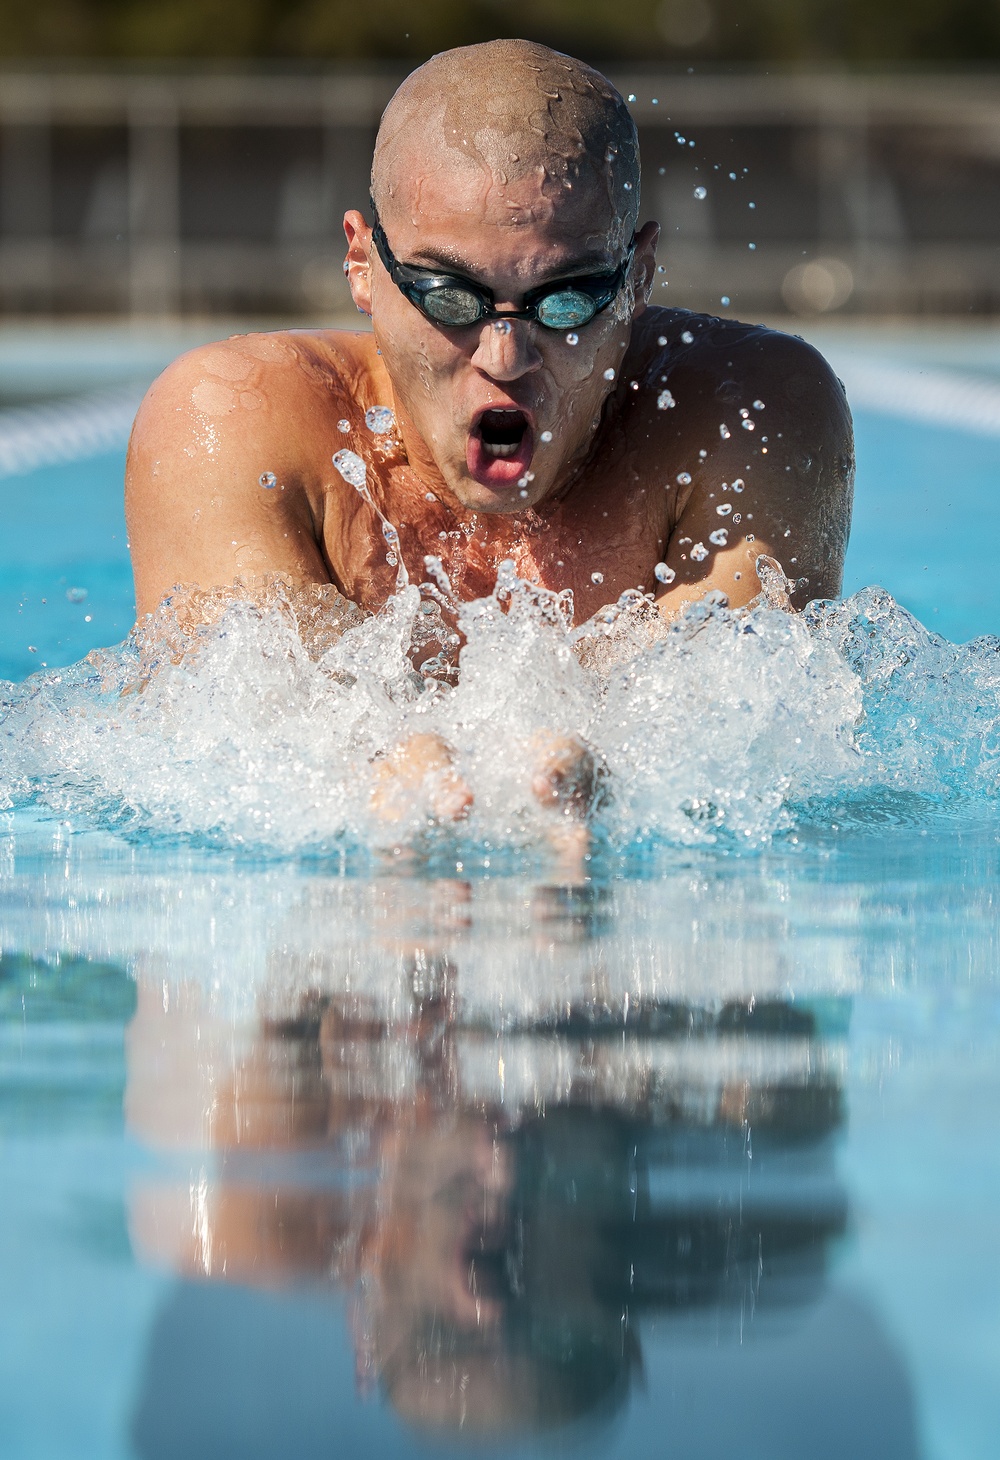 Airman swims into hall of fame